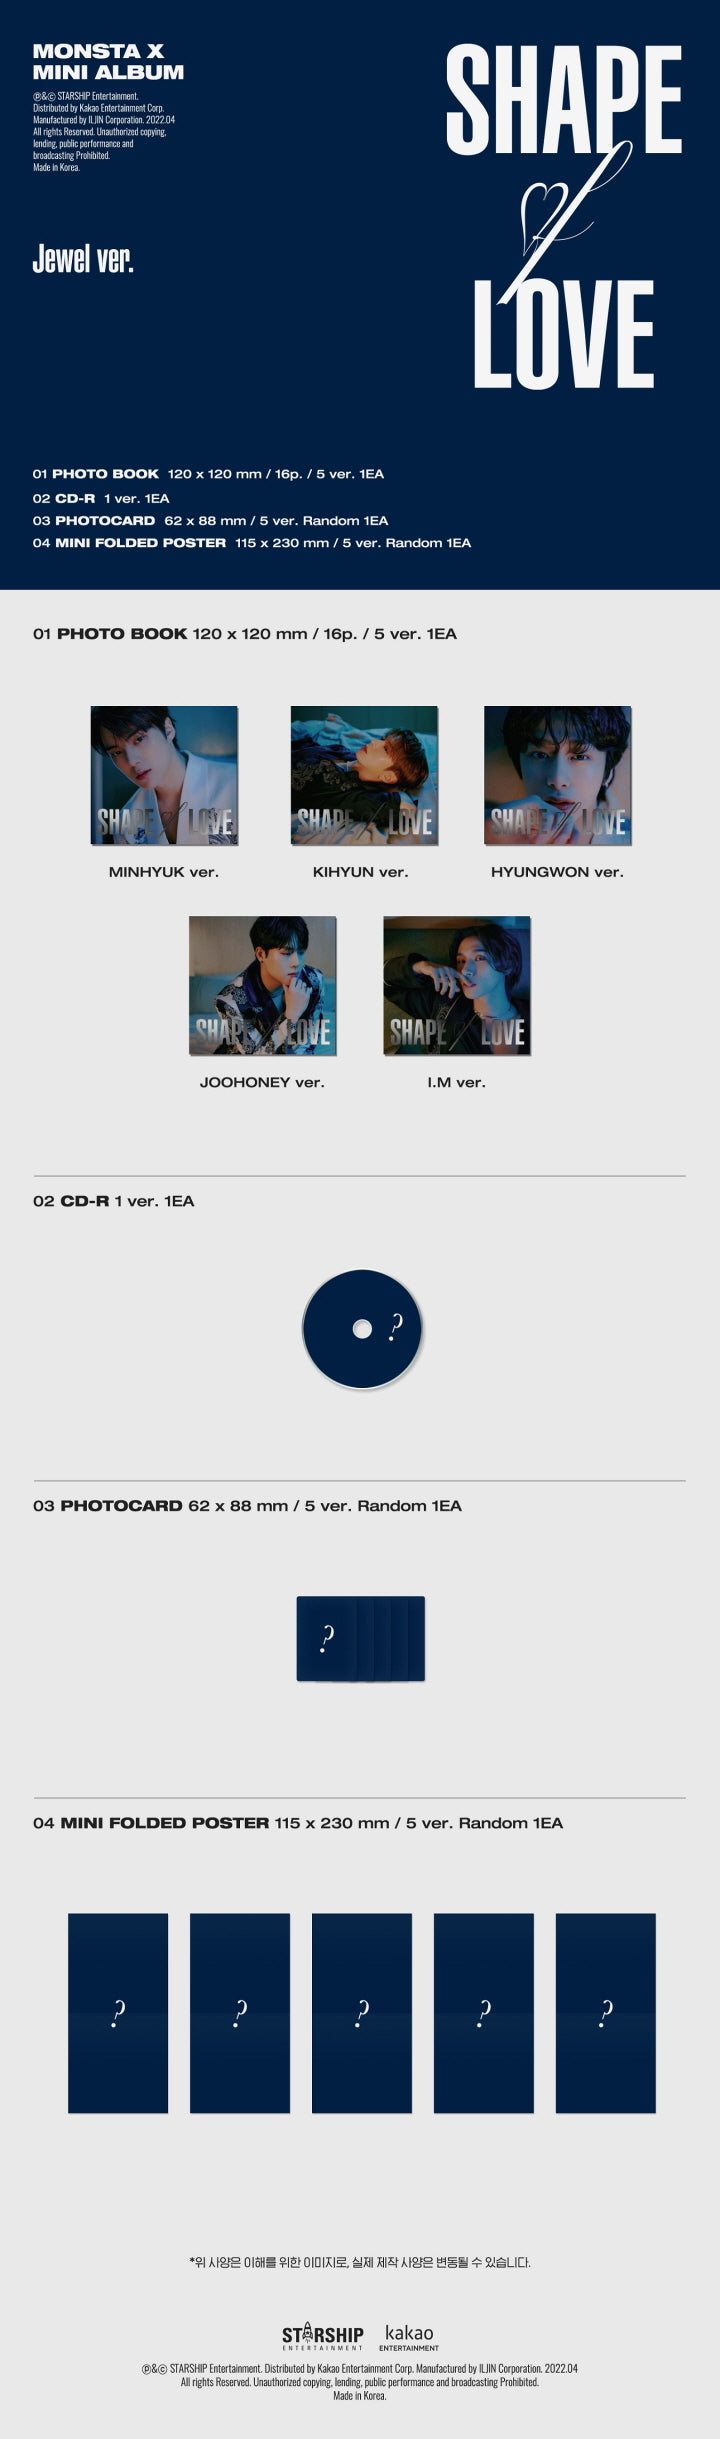 1 CD
1 Photo Card (random out of 5 types)
1 Mini Folded Poster (random out of 5 types)